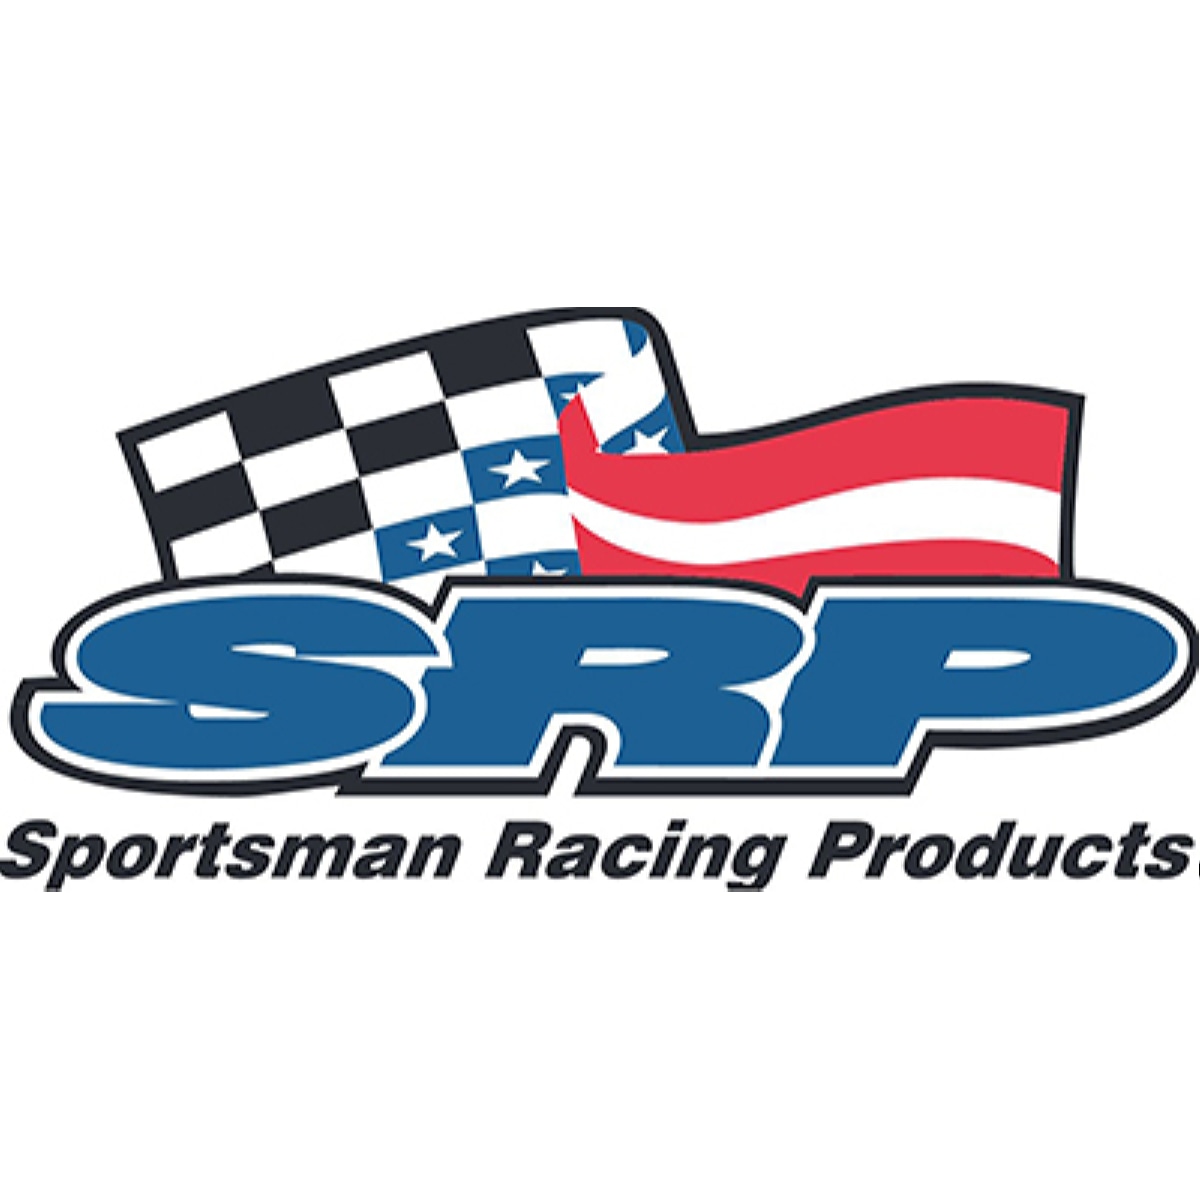 Sportsman Racing Products